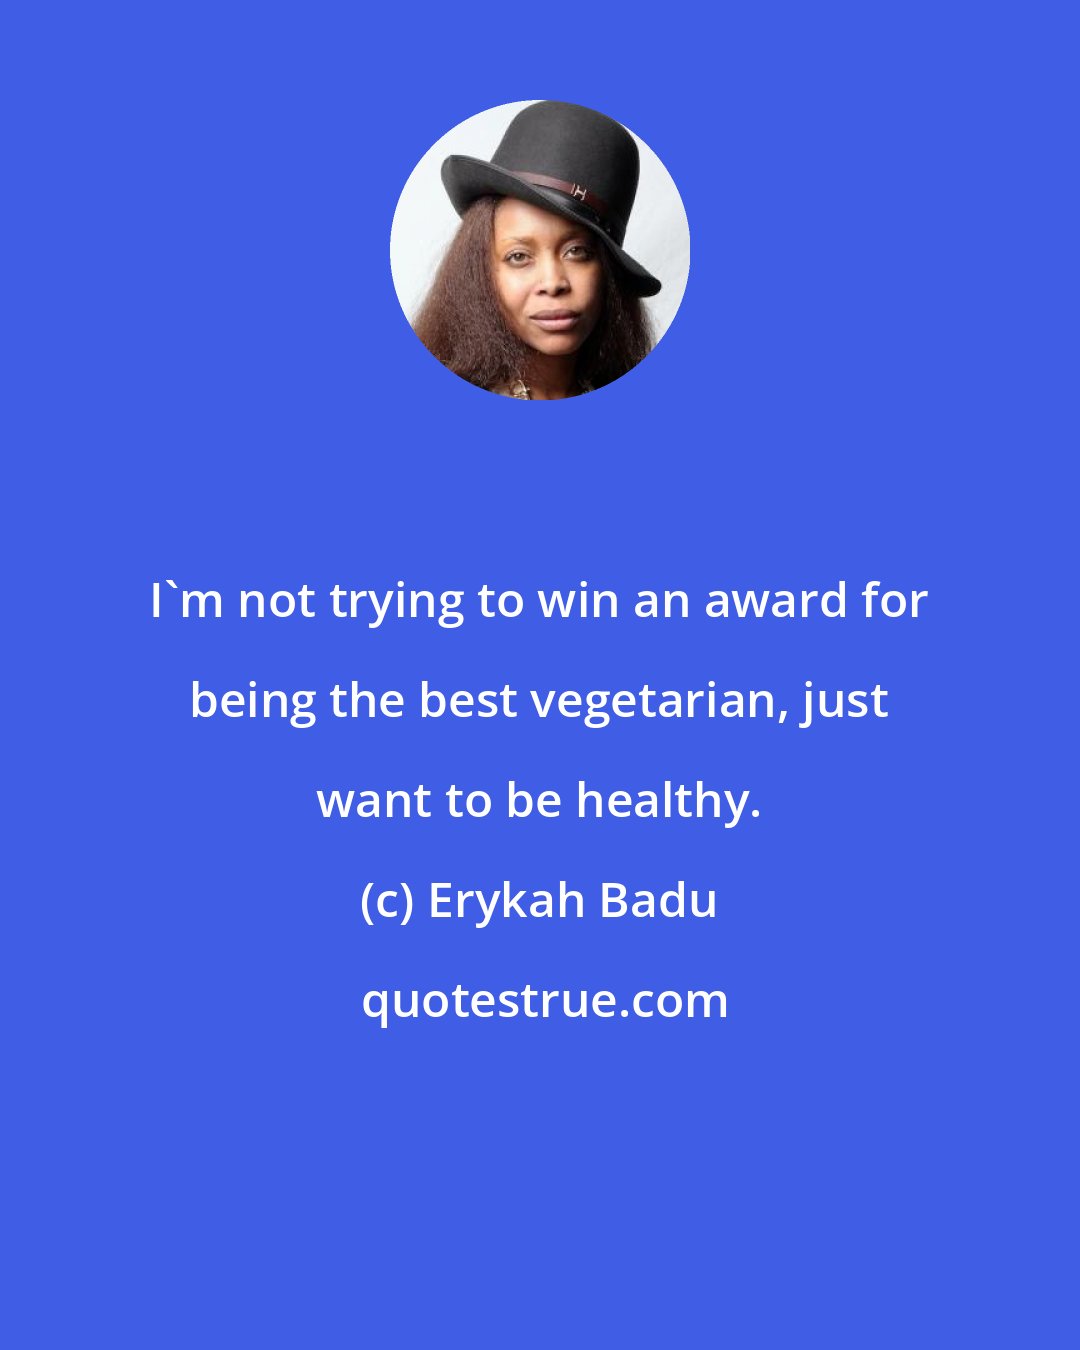 Erykah Badu: I'm not trying to win an award for being the best vegetarian, just want to be healthy.